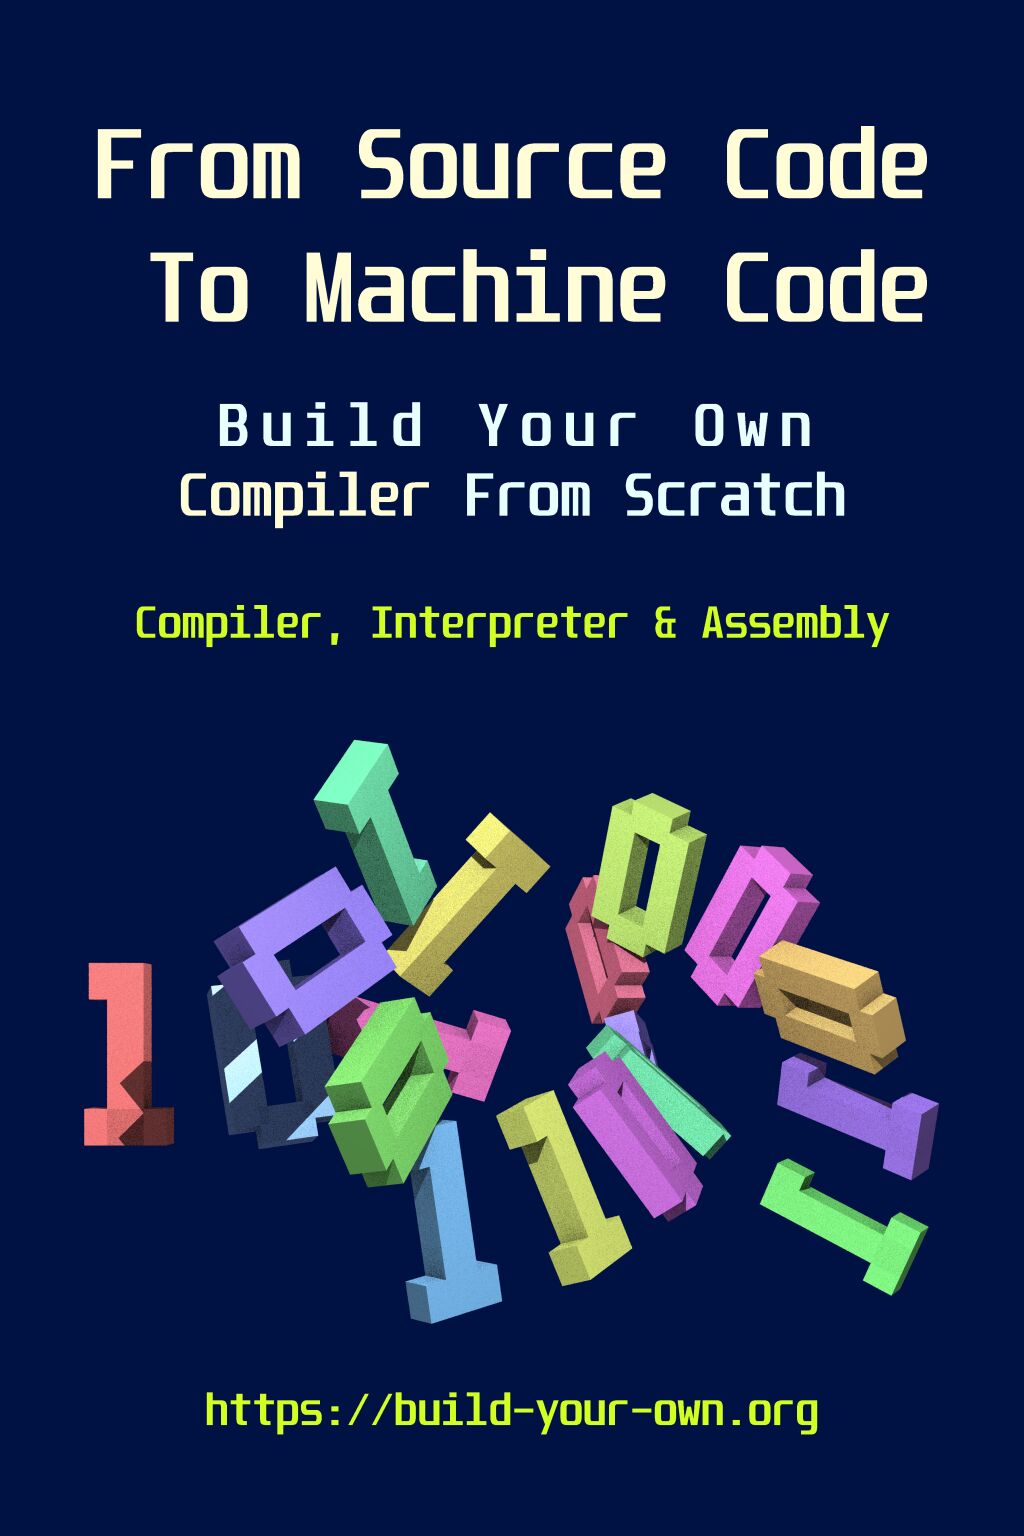 Build Your Own Compiler